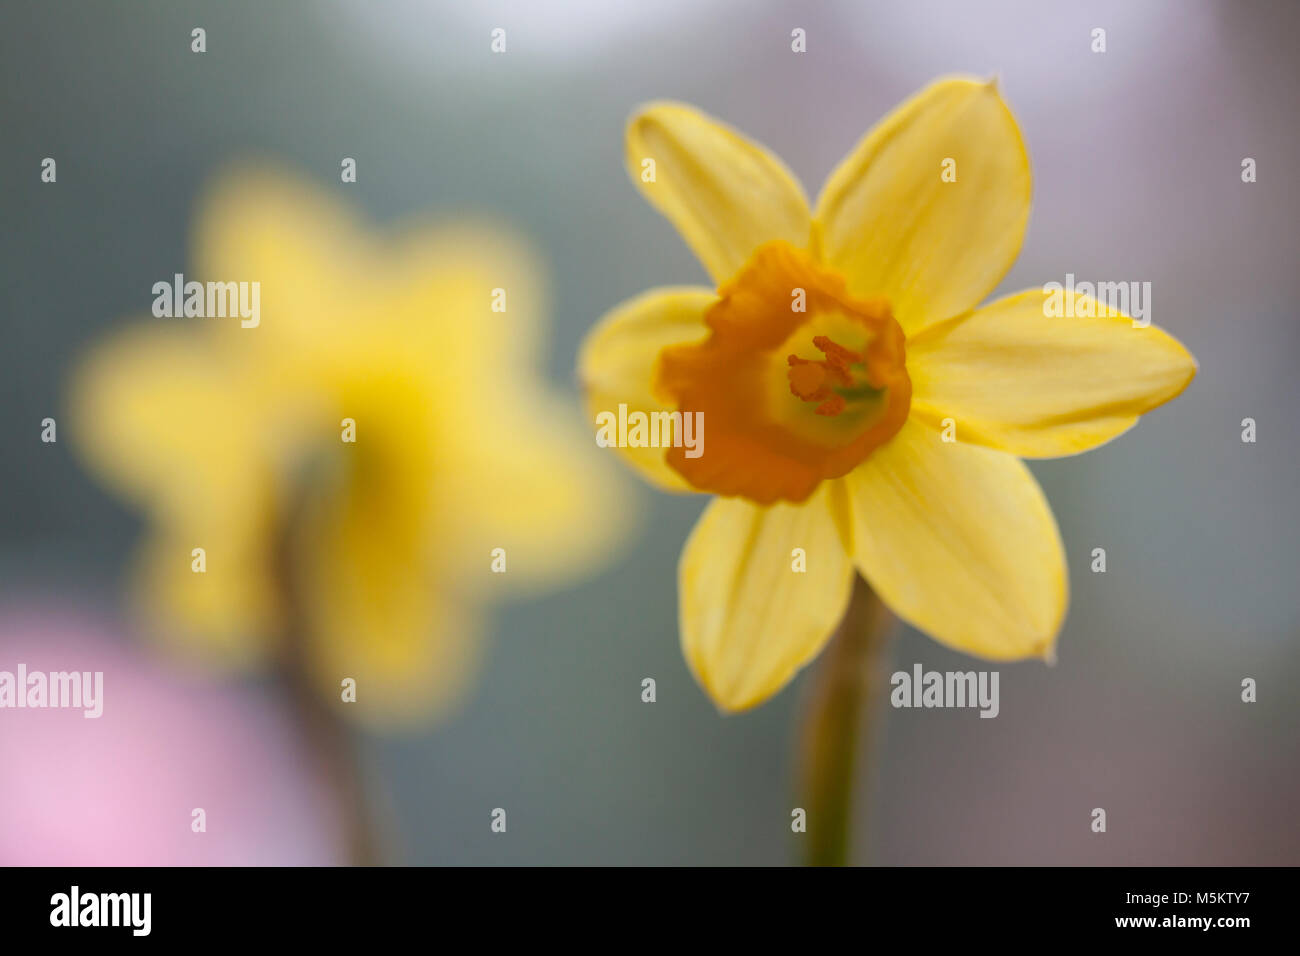 Two daffodils, one facing forward and one out of focus facing away with very soft boke background in grey. Stock Photo